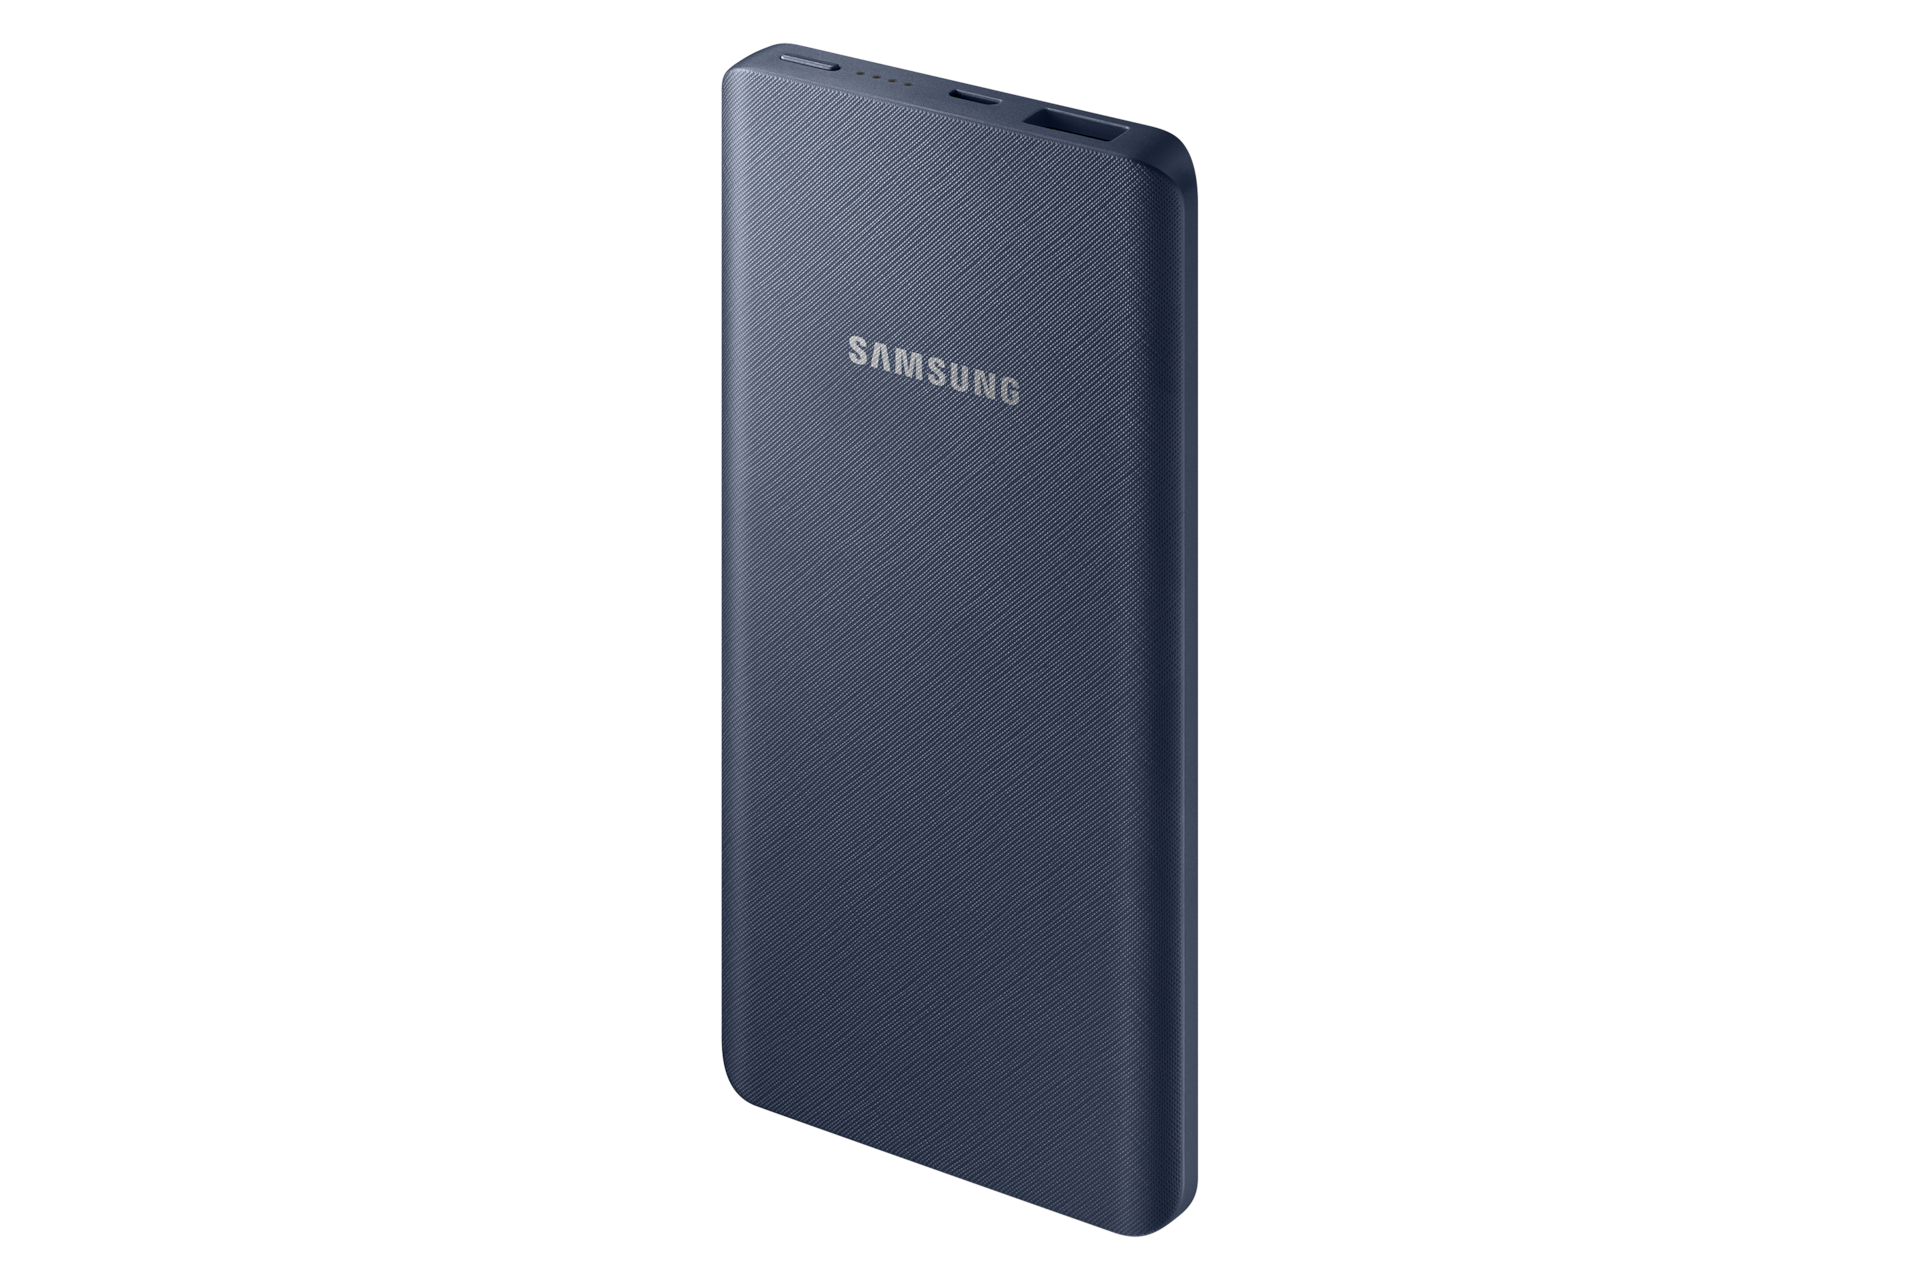 https://images.samsung.com/is/image/samsung/my-battery-pack-5000mah-eb-p3020-eb-p3020bnegww-rperspectivebluearctic-83011967?$624_624_PNG$